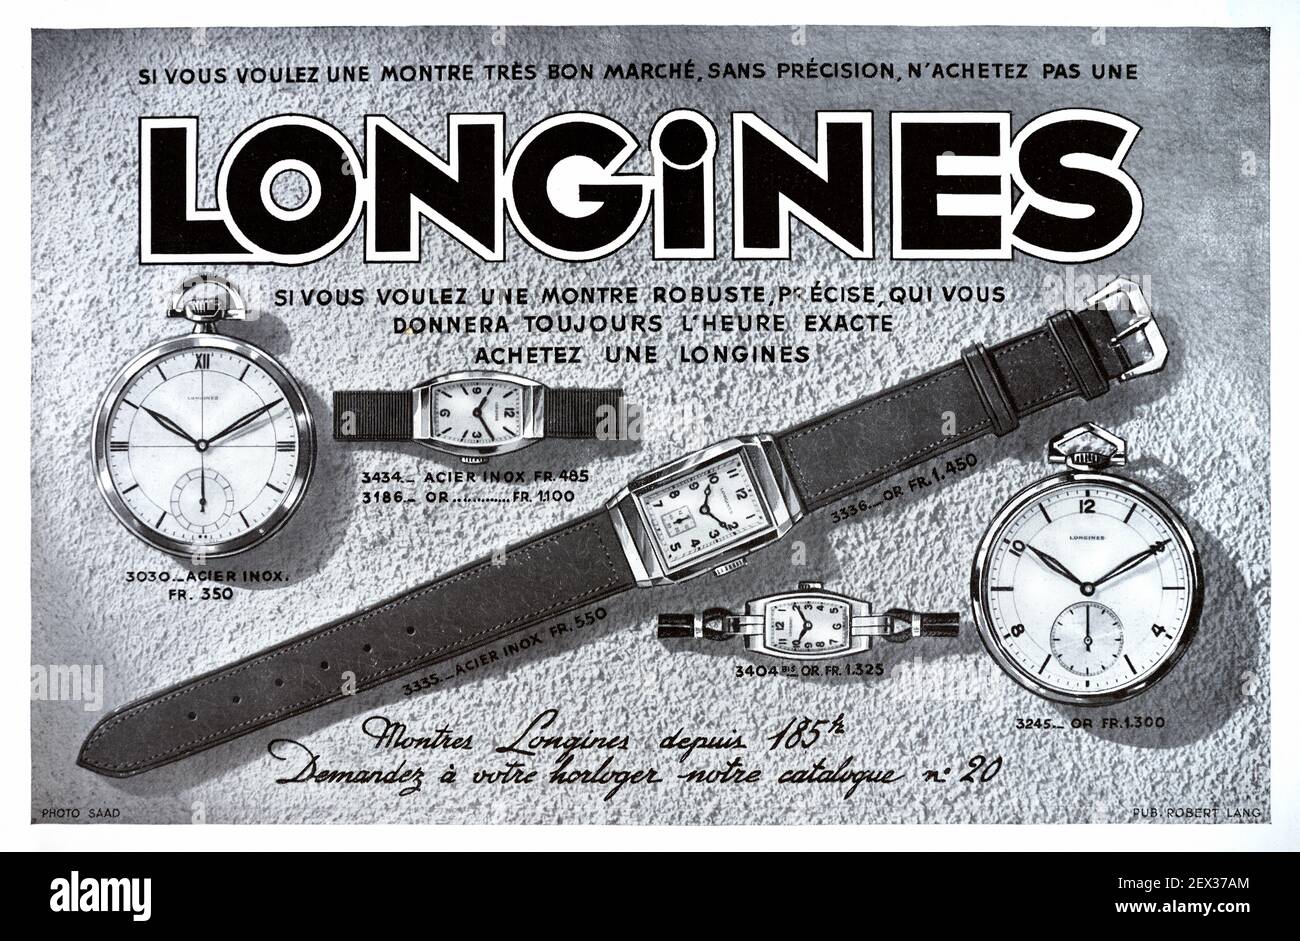 Vintage Advert, Advertisement or Publicity for Longines Watches, Women ...